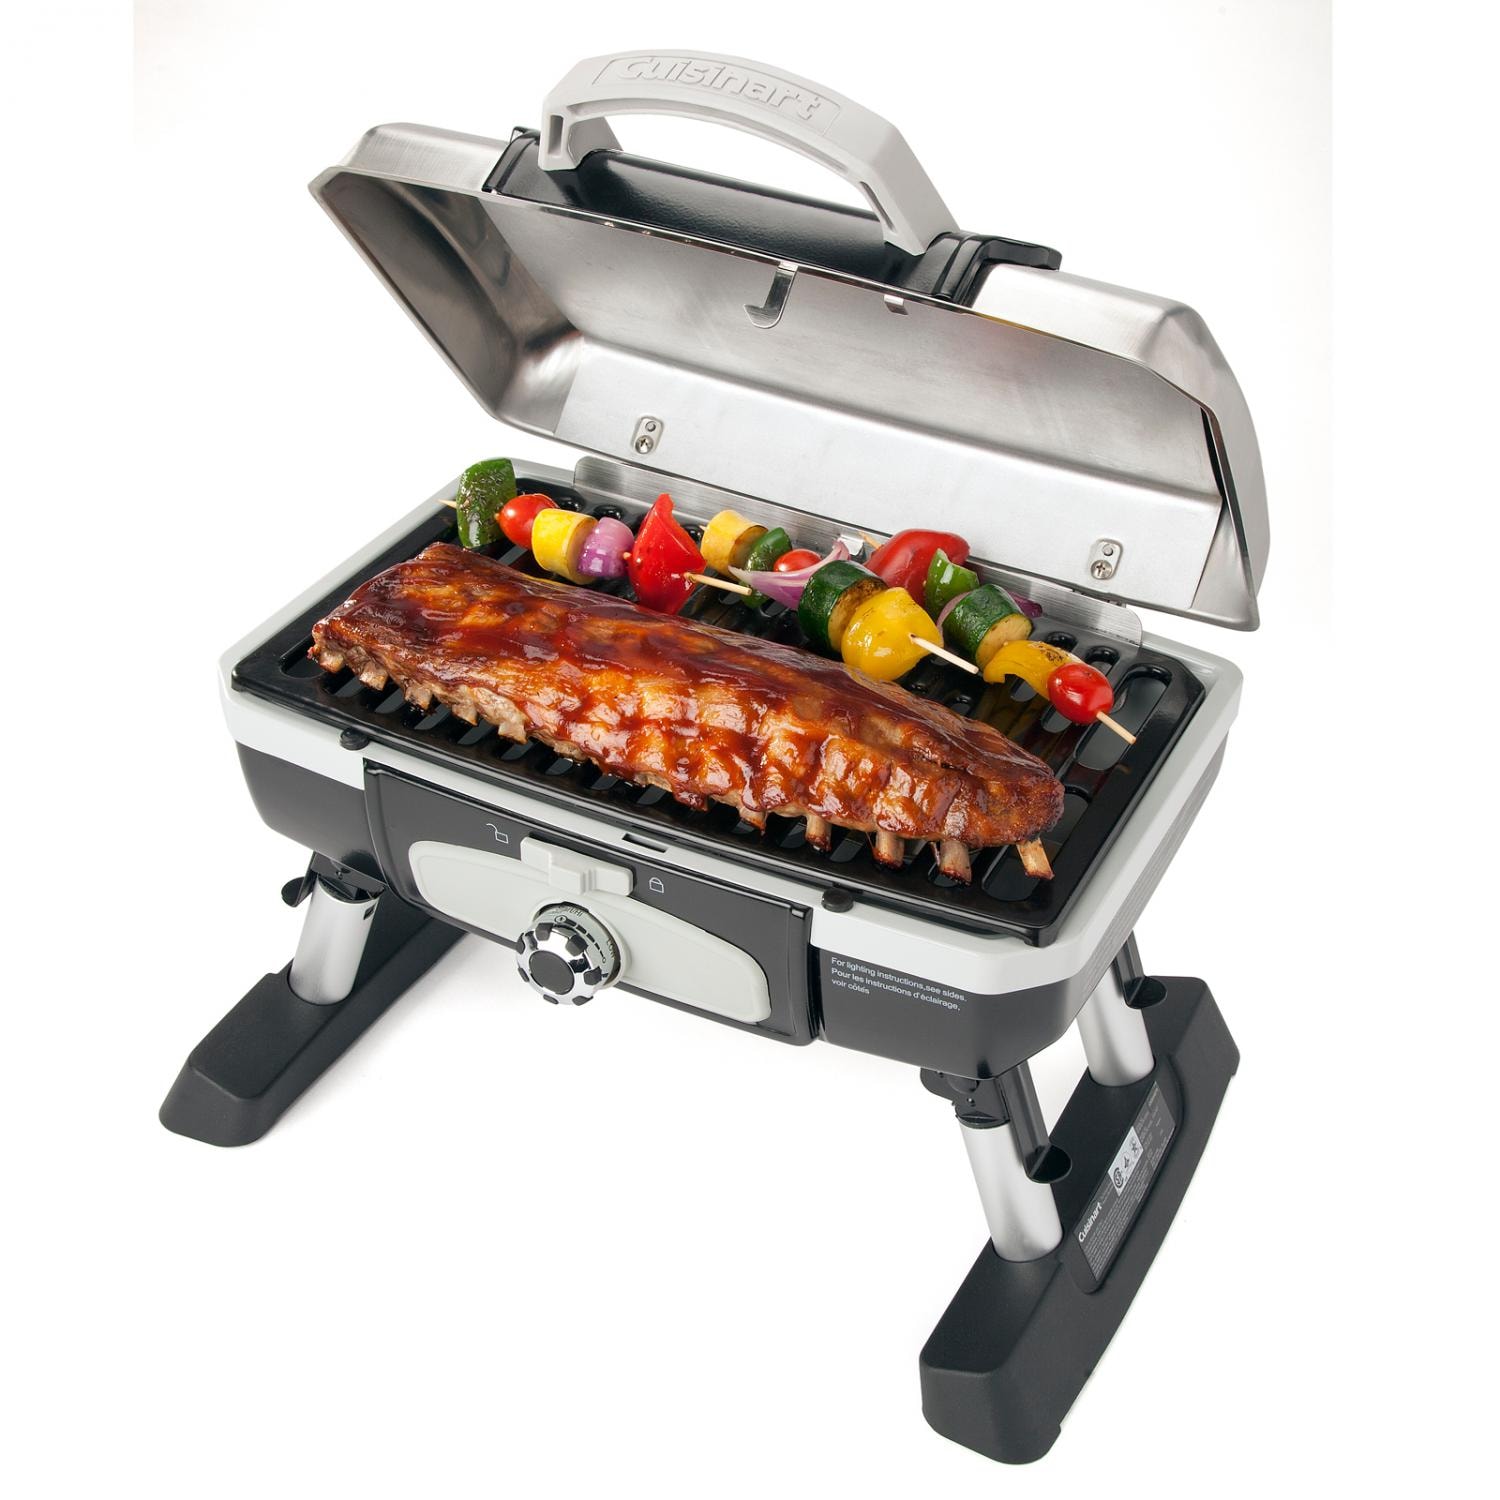 Cuisinart Petite Gourmet Portable Tabletop Gas Grill - image 3 of 3